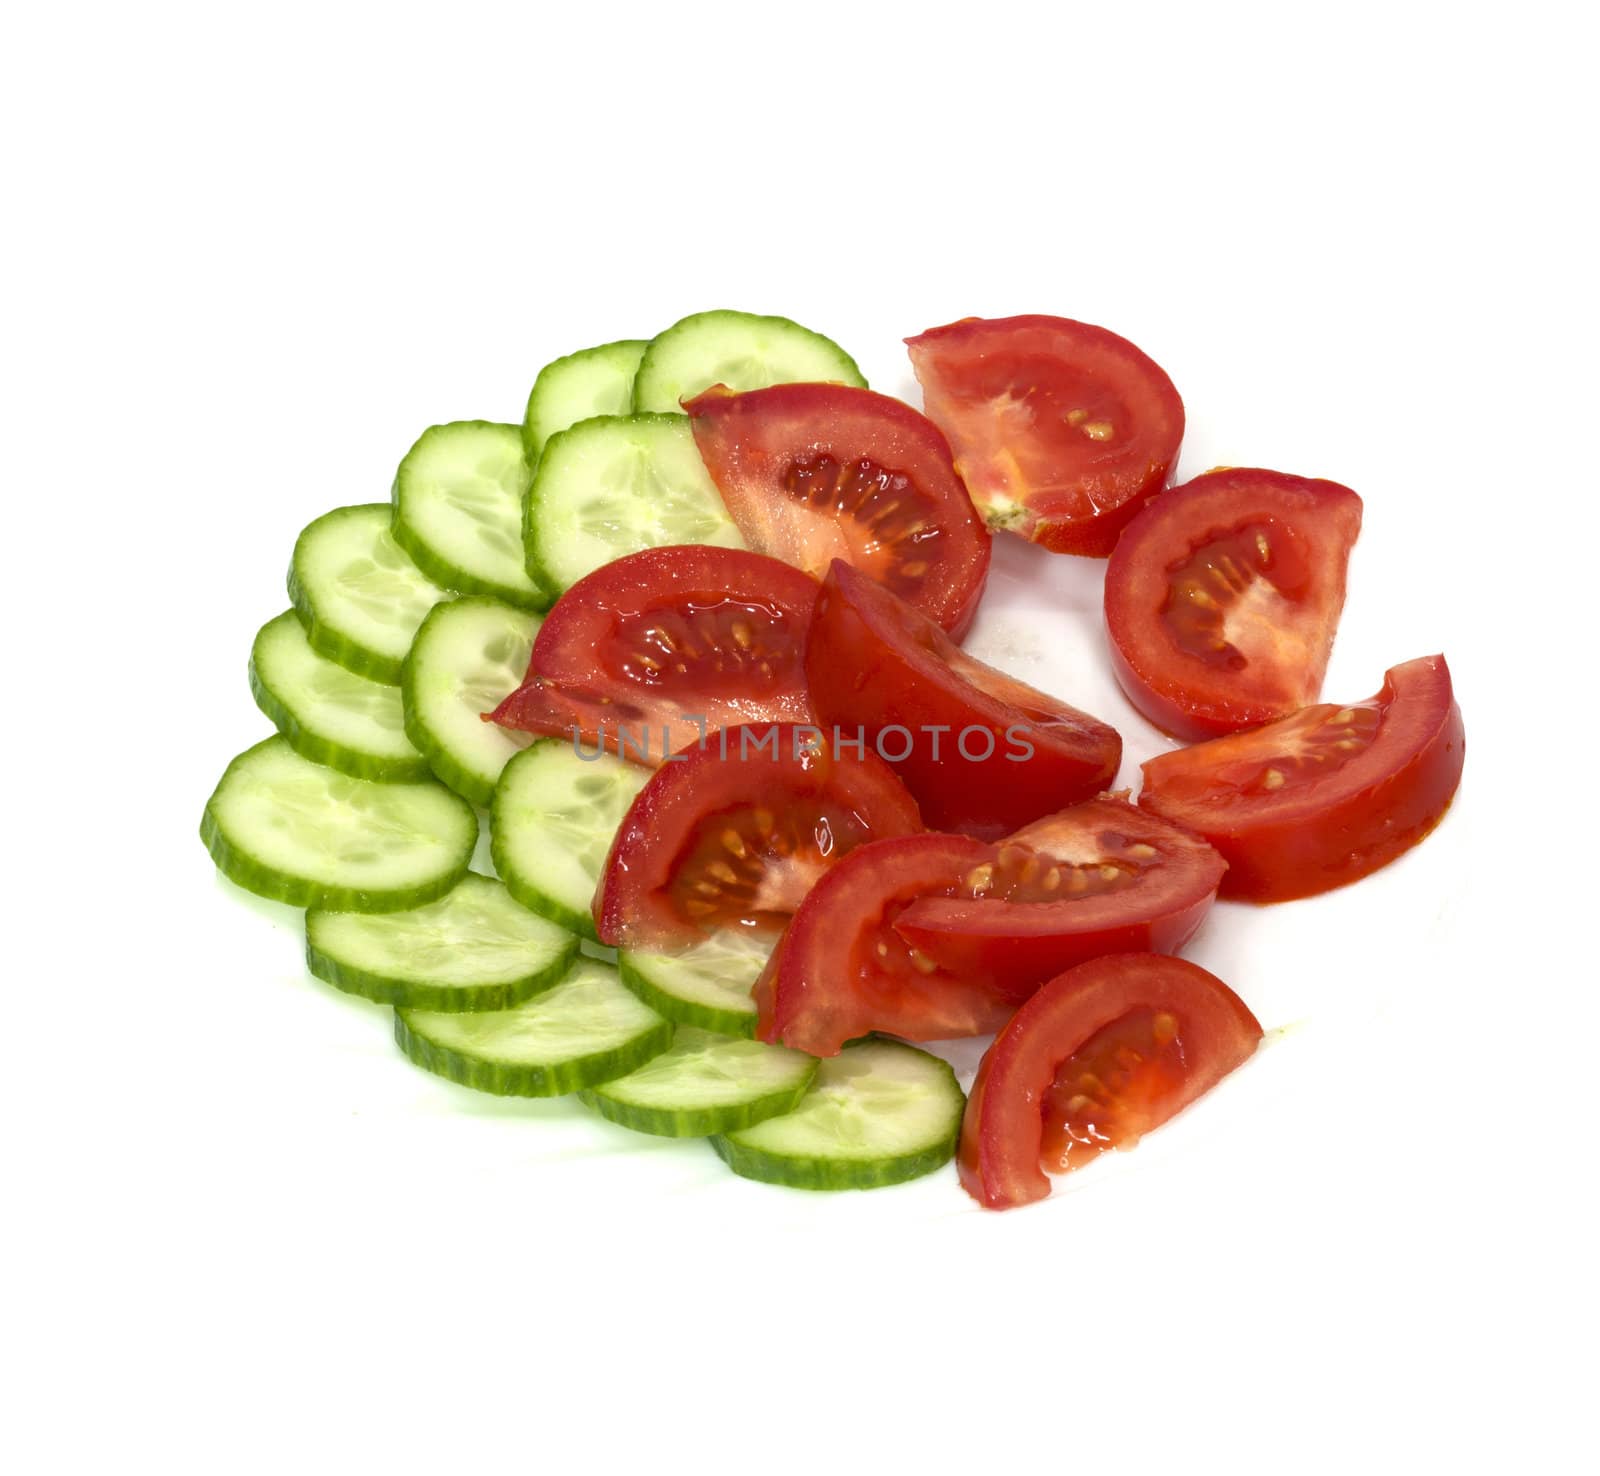 Tomatoes and cucumbers on white background  by schankz